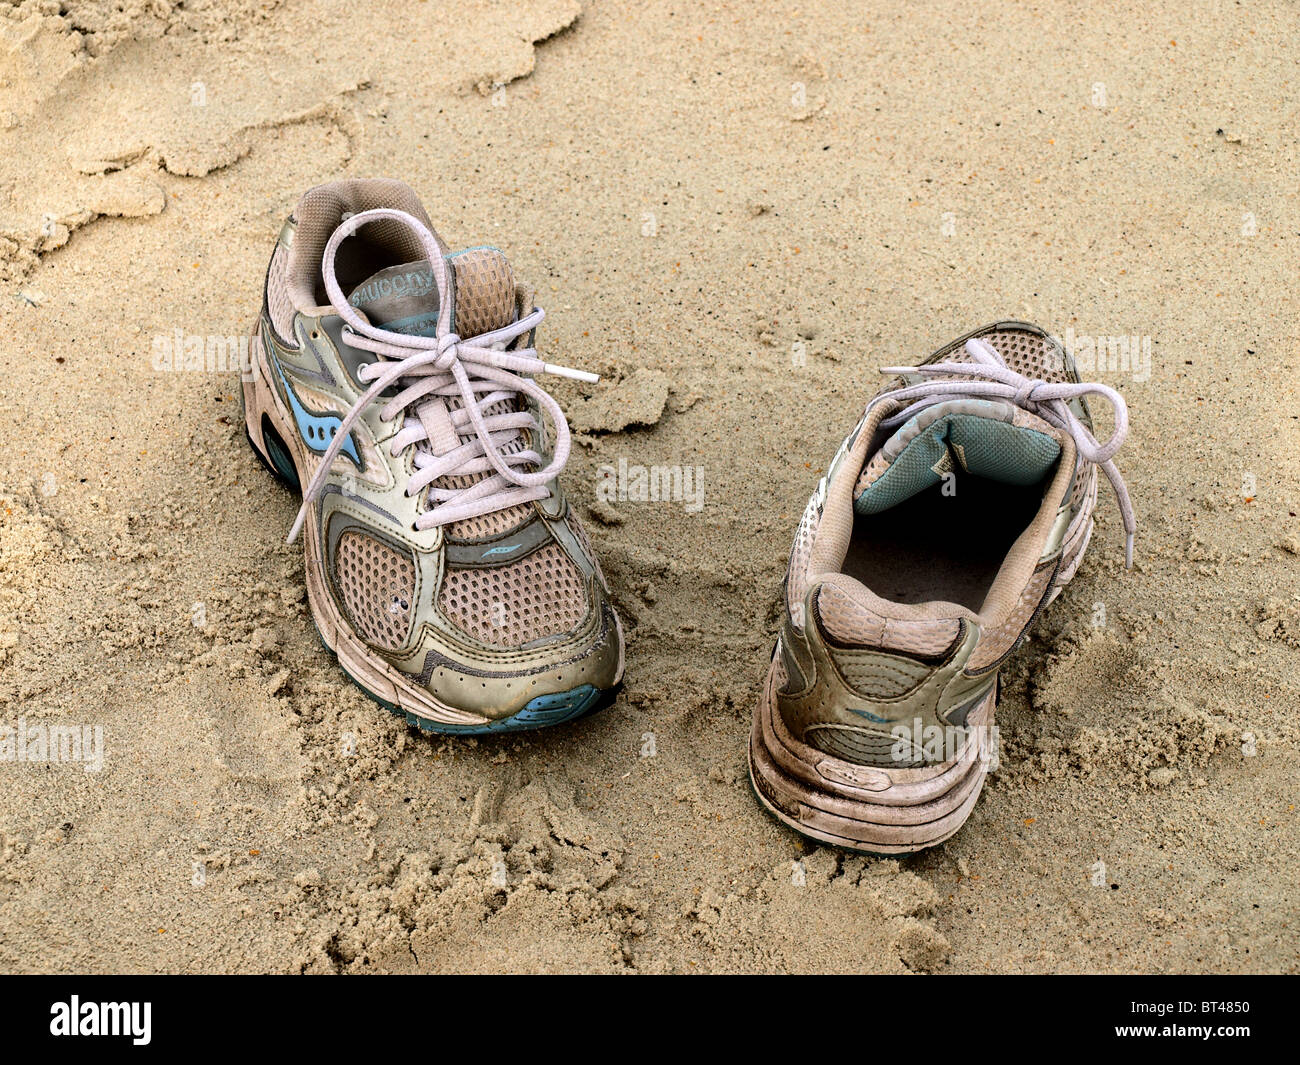 tennis walking sneakers shoes on sandy sand beach with shoestrings worn  Stock Photo - Alamy